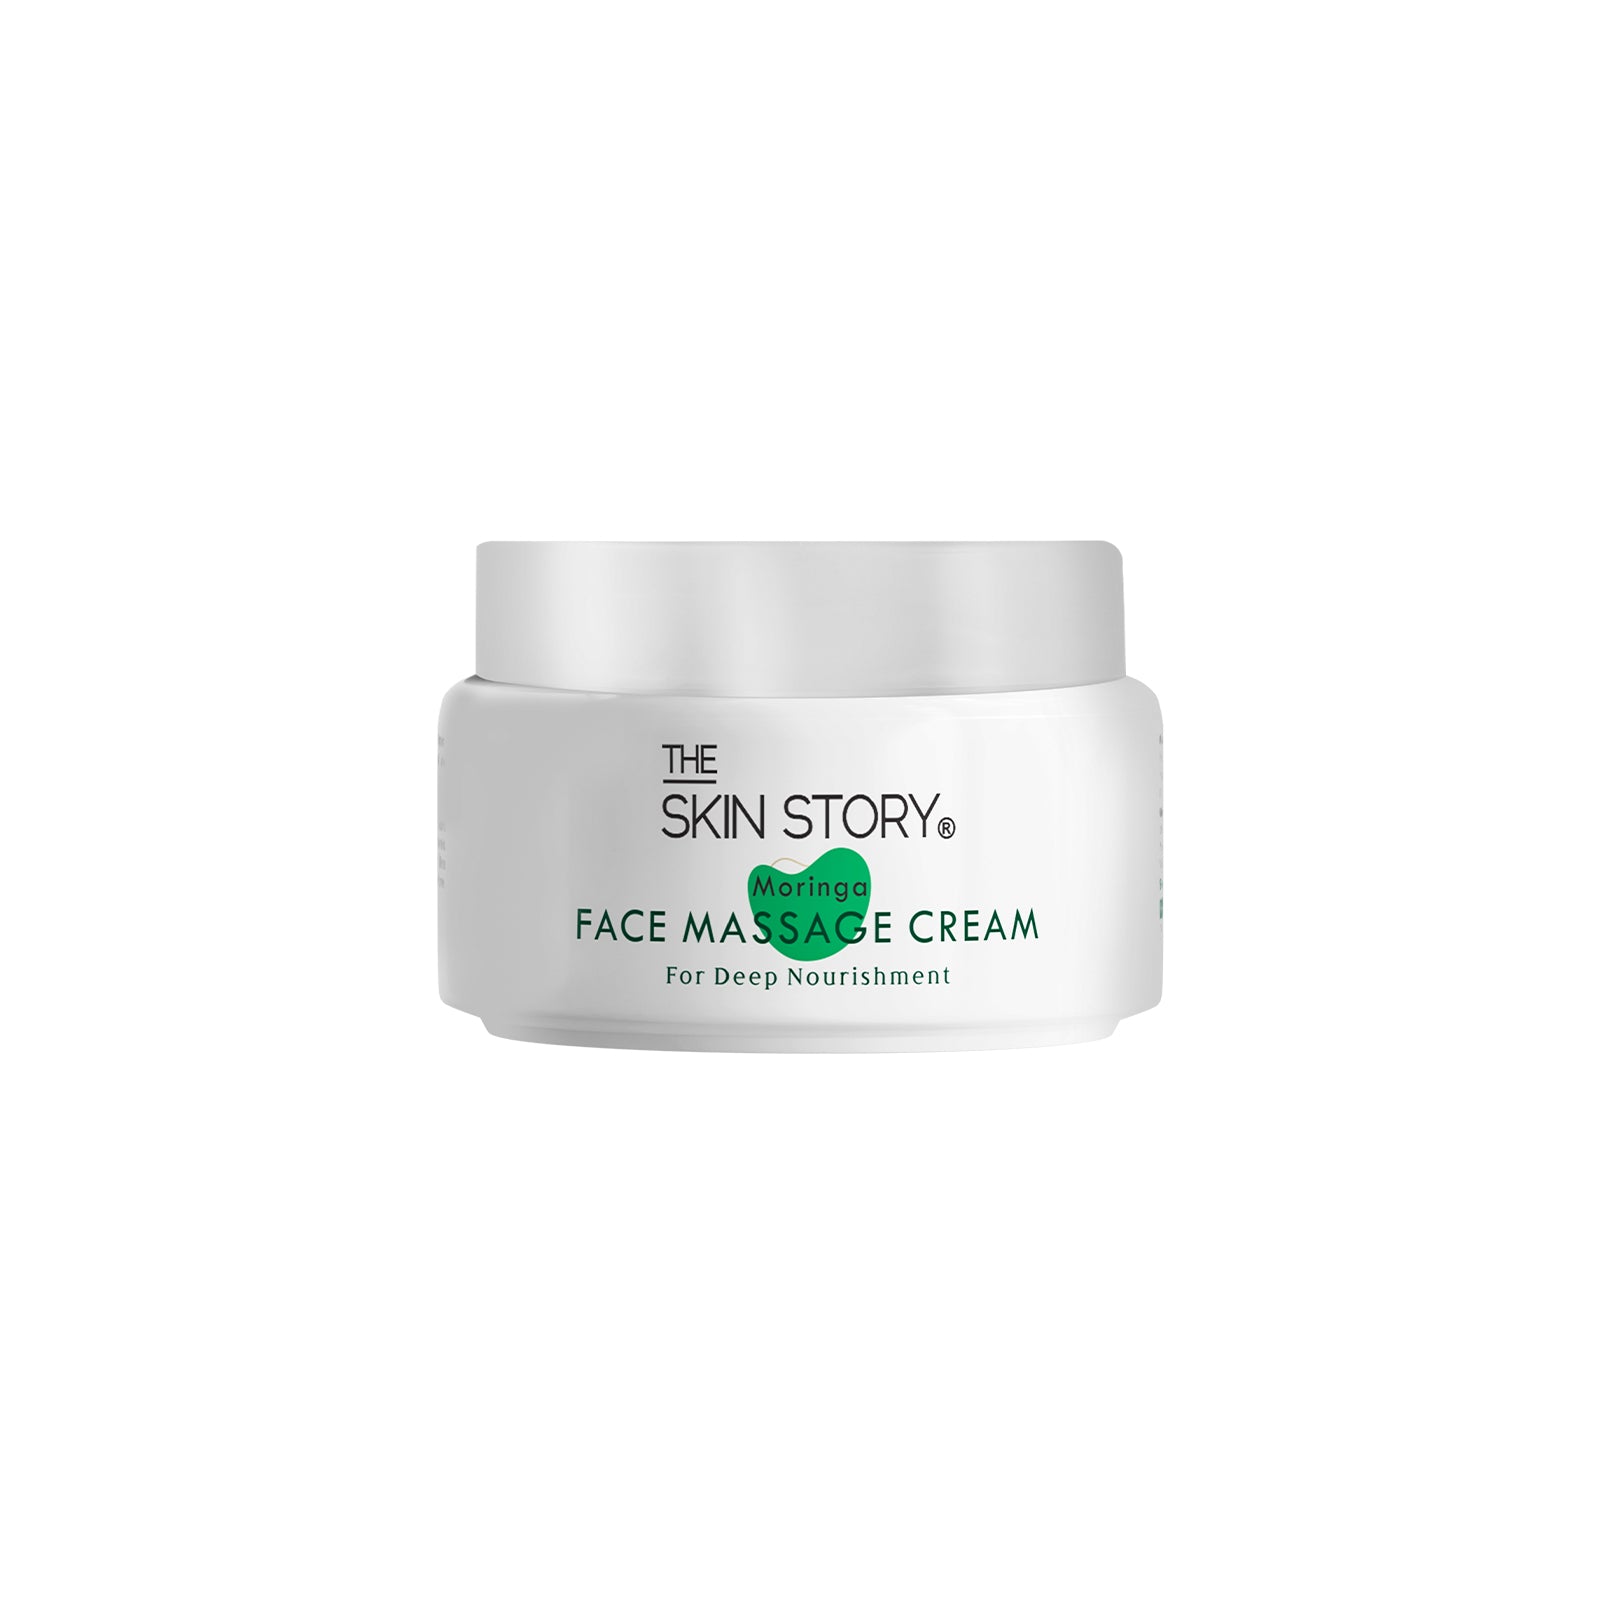 The Skin Story Massage Cream for Face | Soothing & Detoxifying | Enriched With Moringa |All Skin Types | 50g